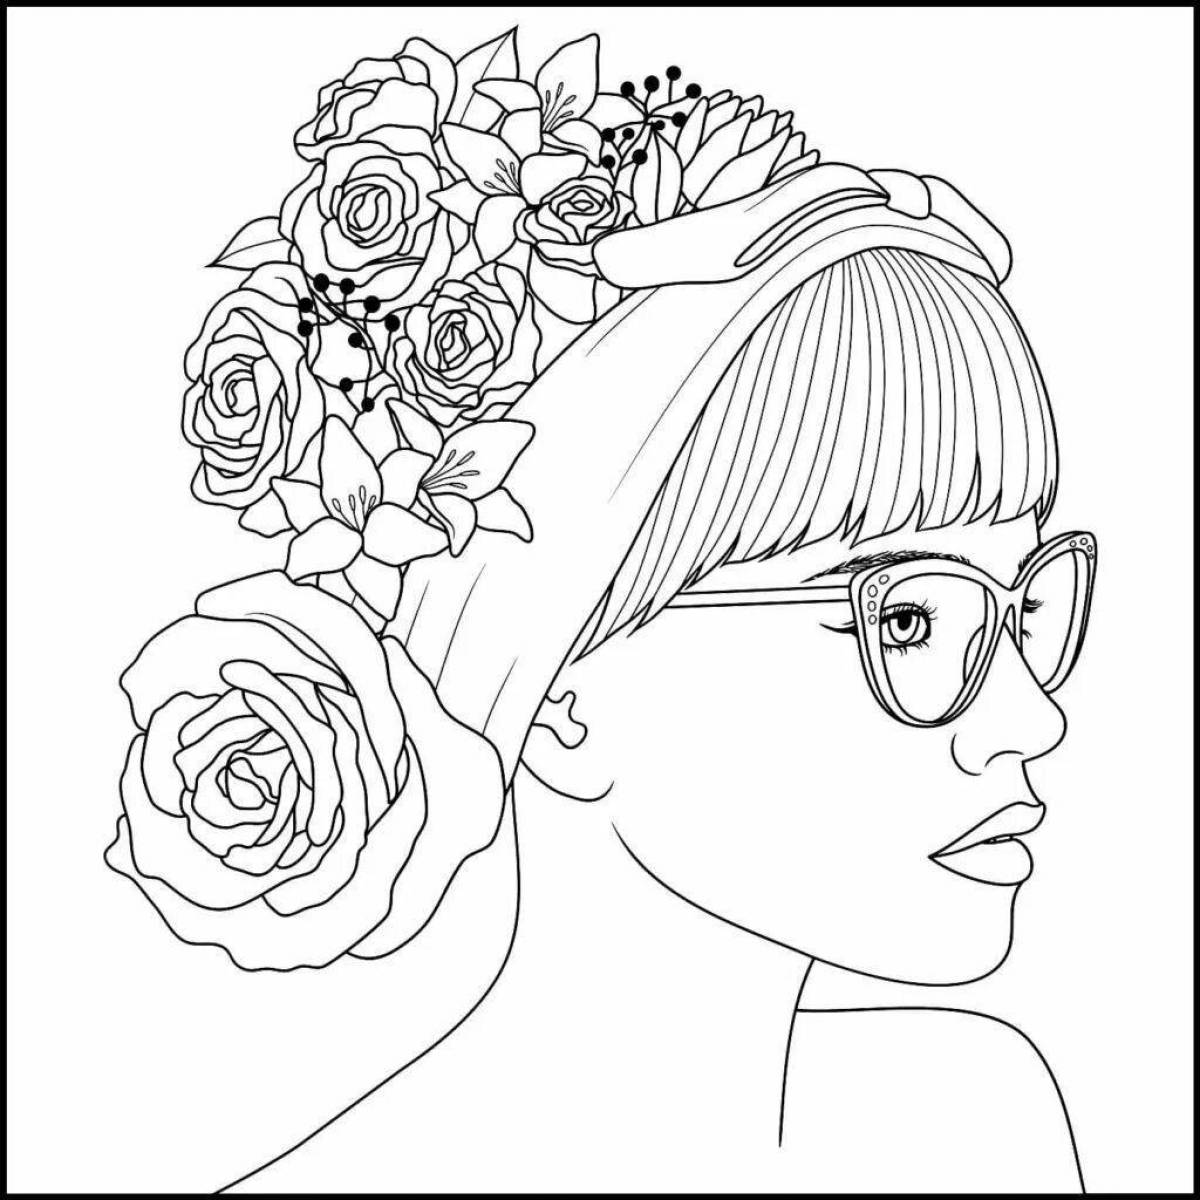 Delightful coloring book for girls 20 years old